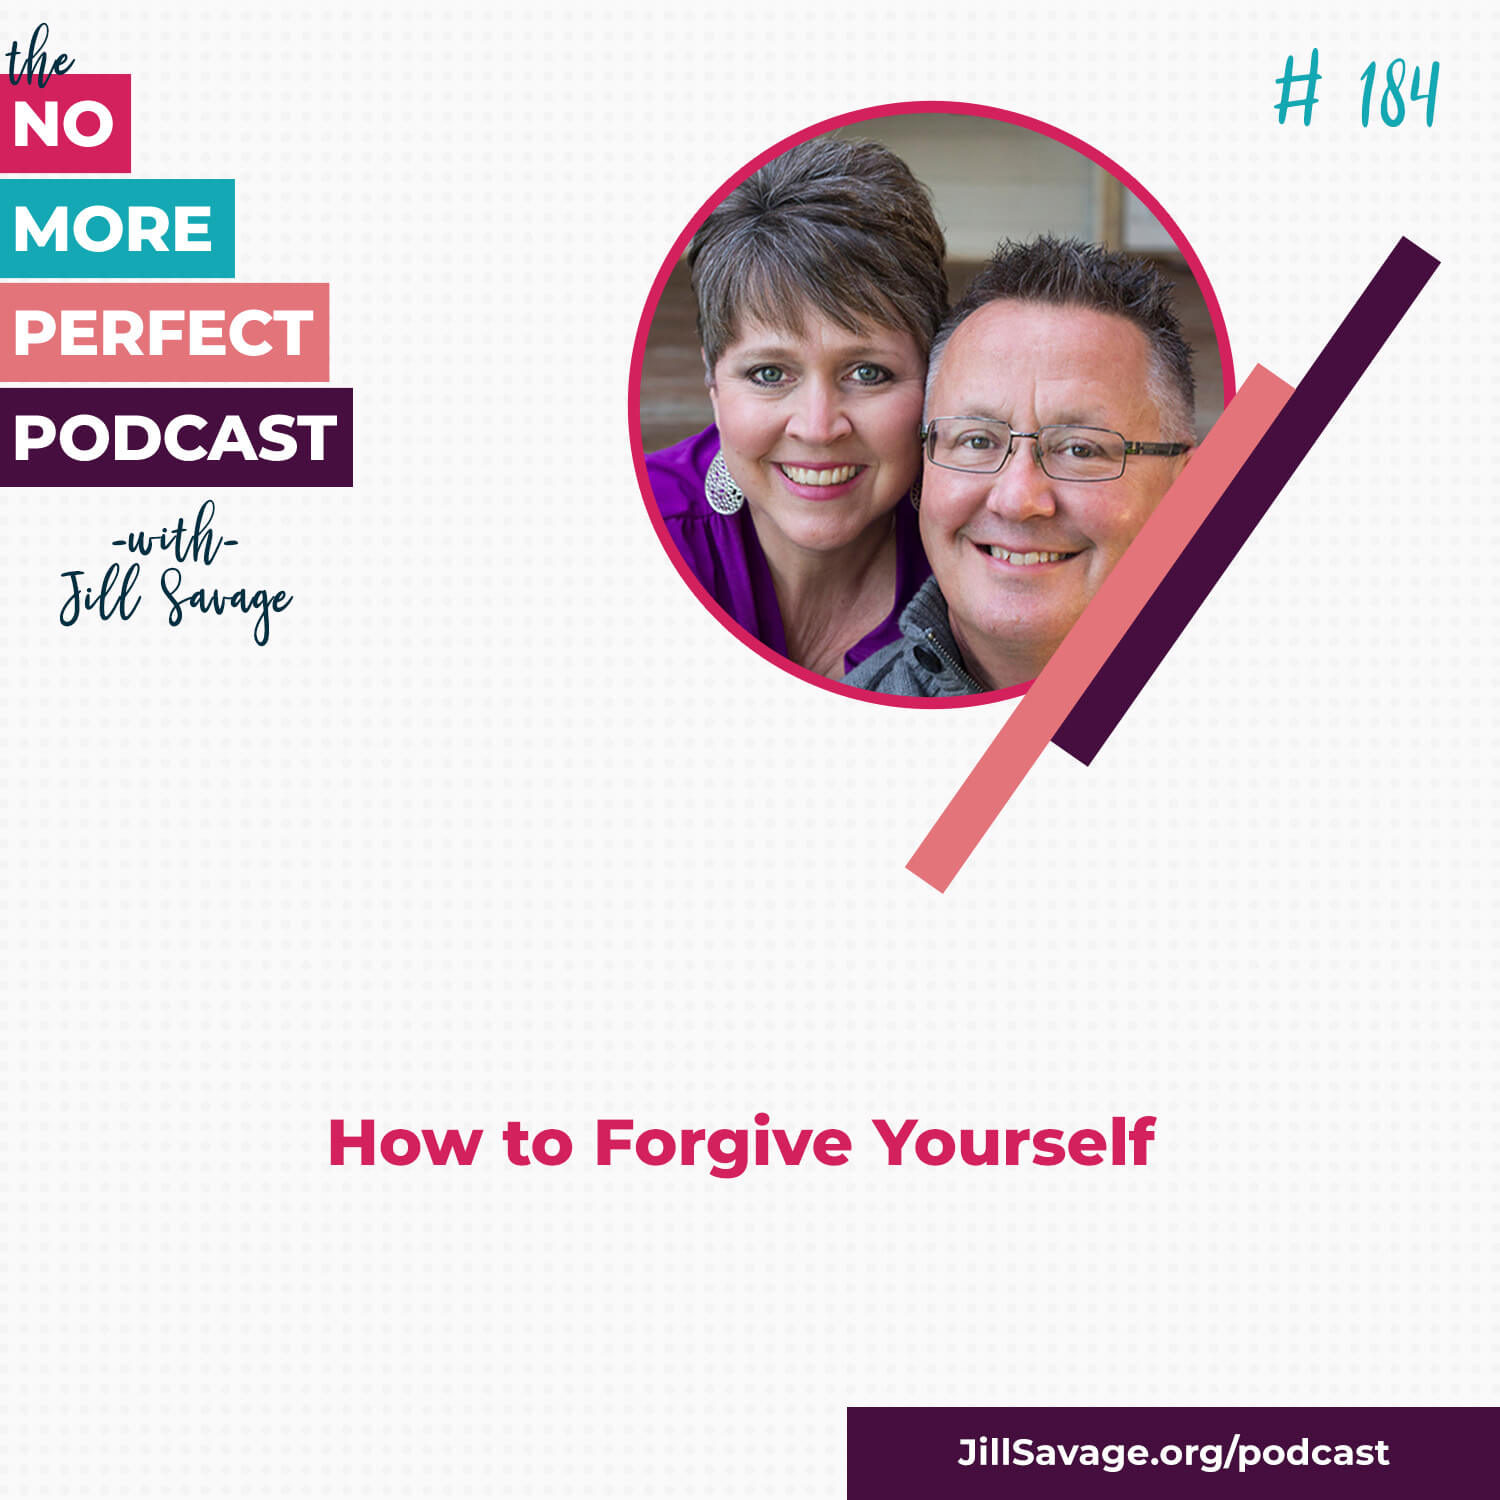 How to Forgive Yourself | Episode 184